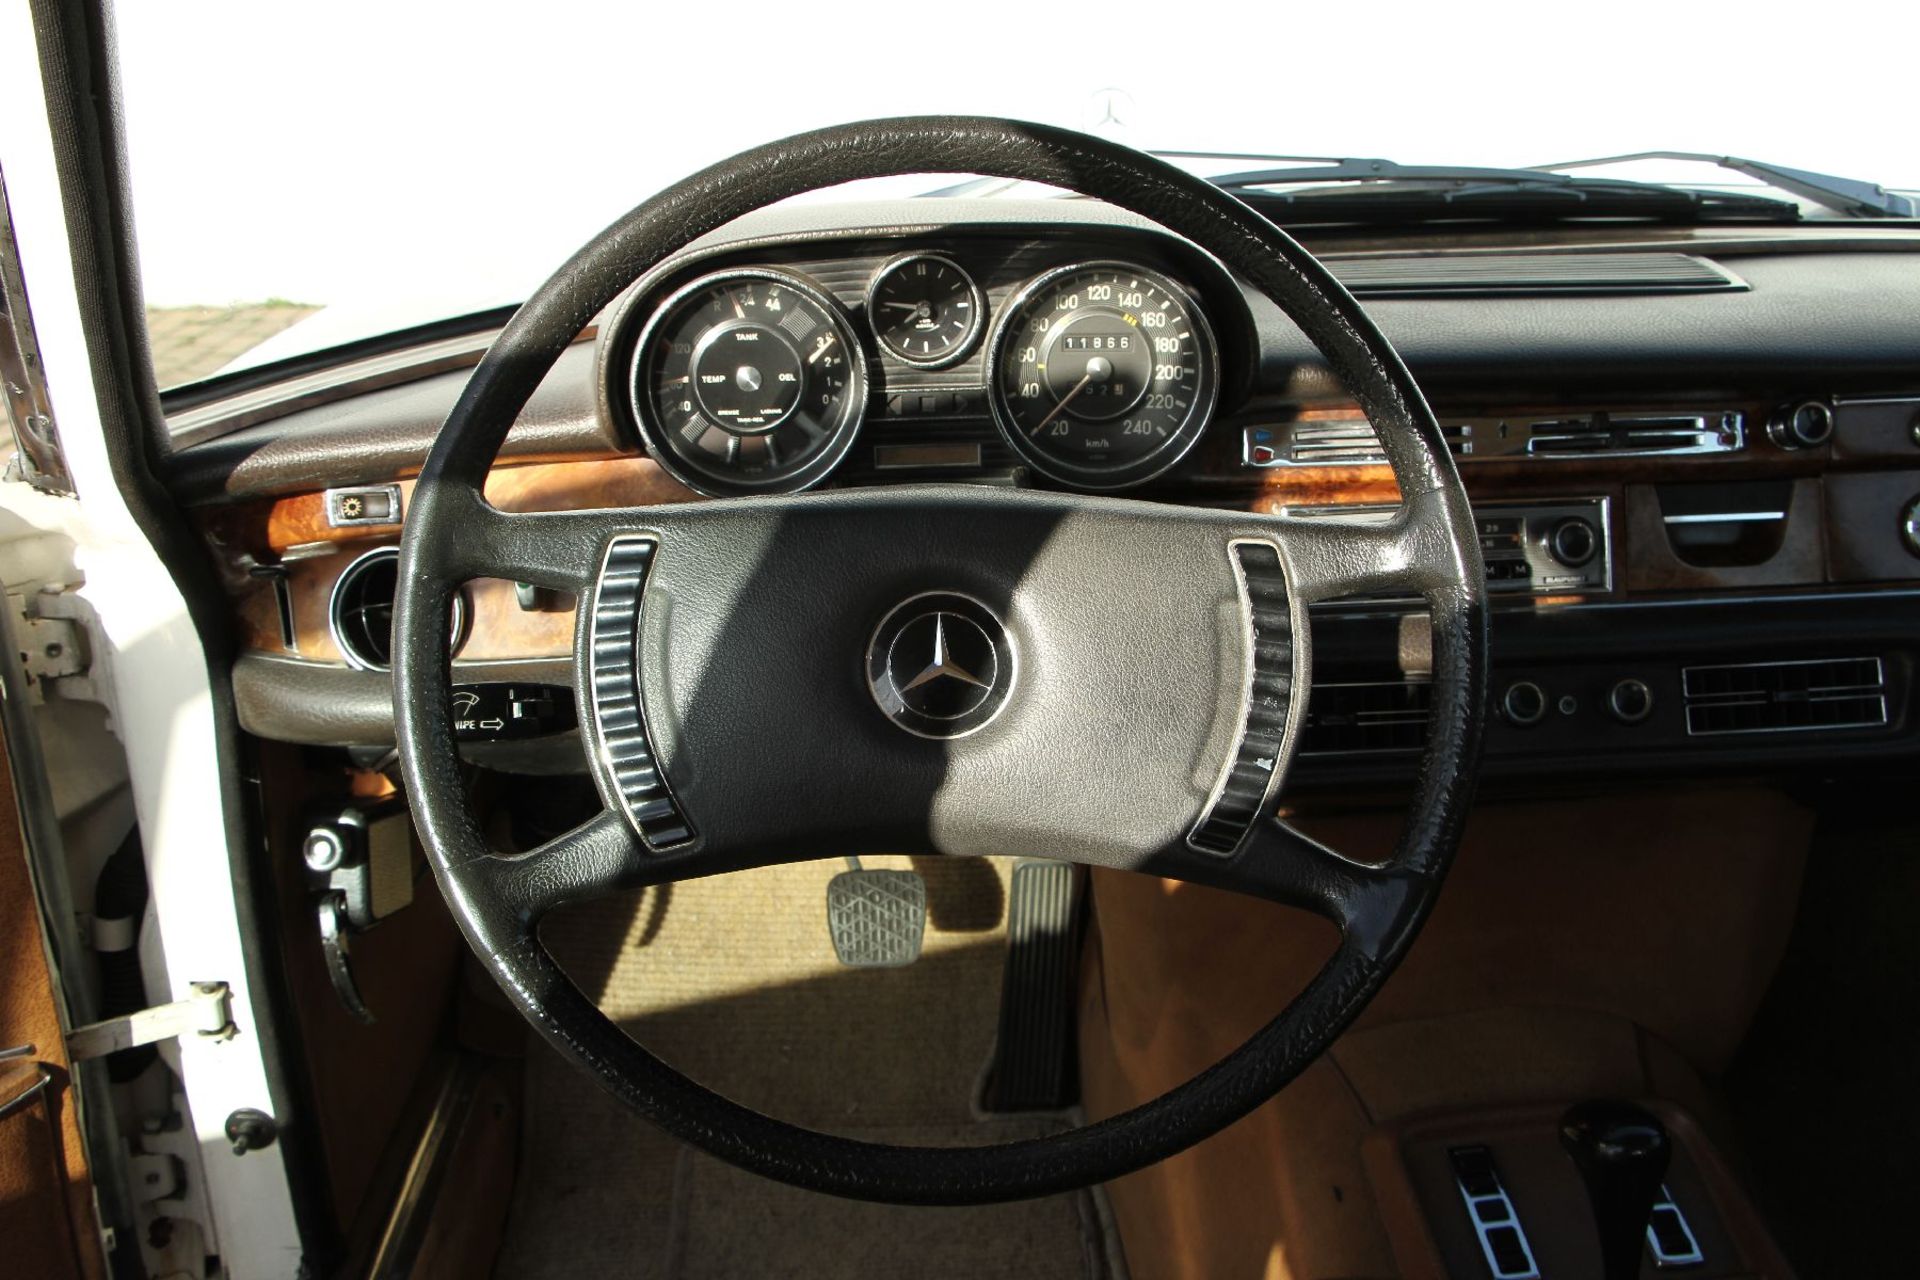 Mercedes-Benz 300 SEL 3,5, Chassis Number: 10905612007692, first registered 09/1971, german car with - Bild 14 aus 15